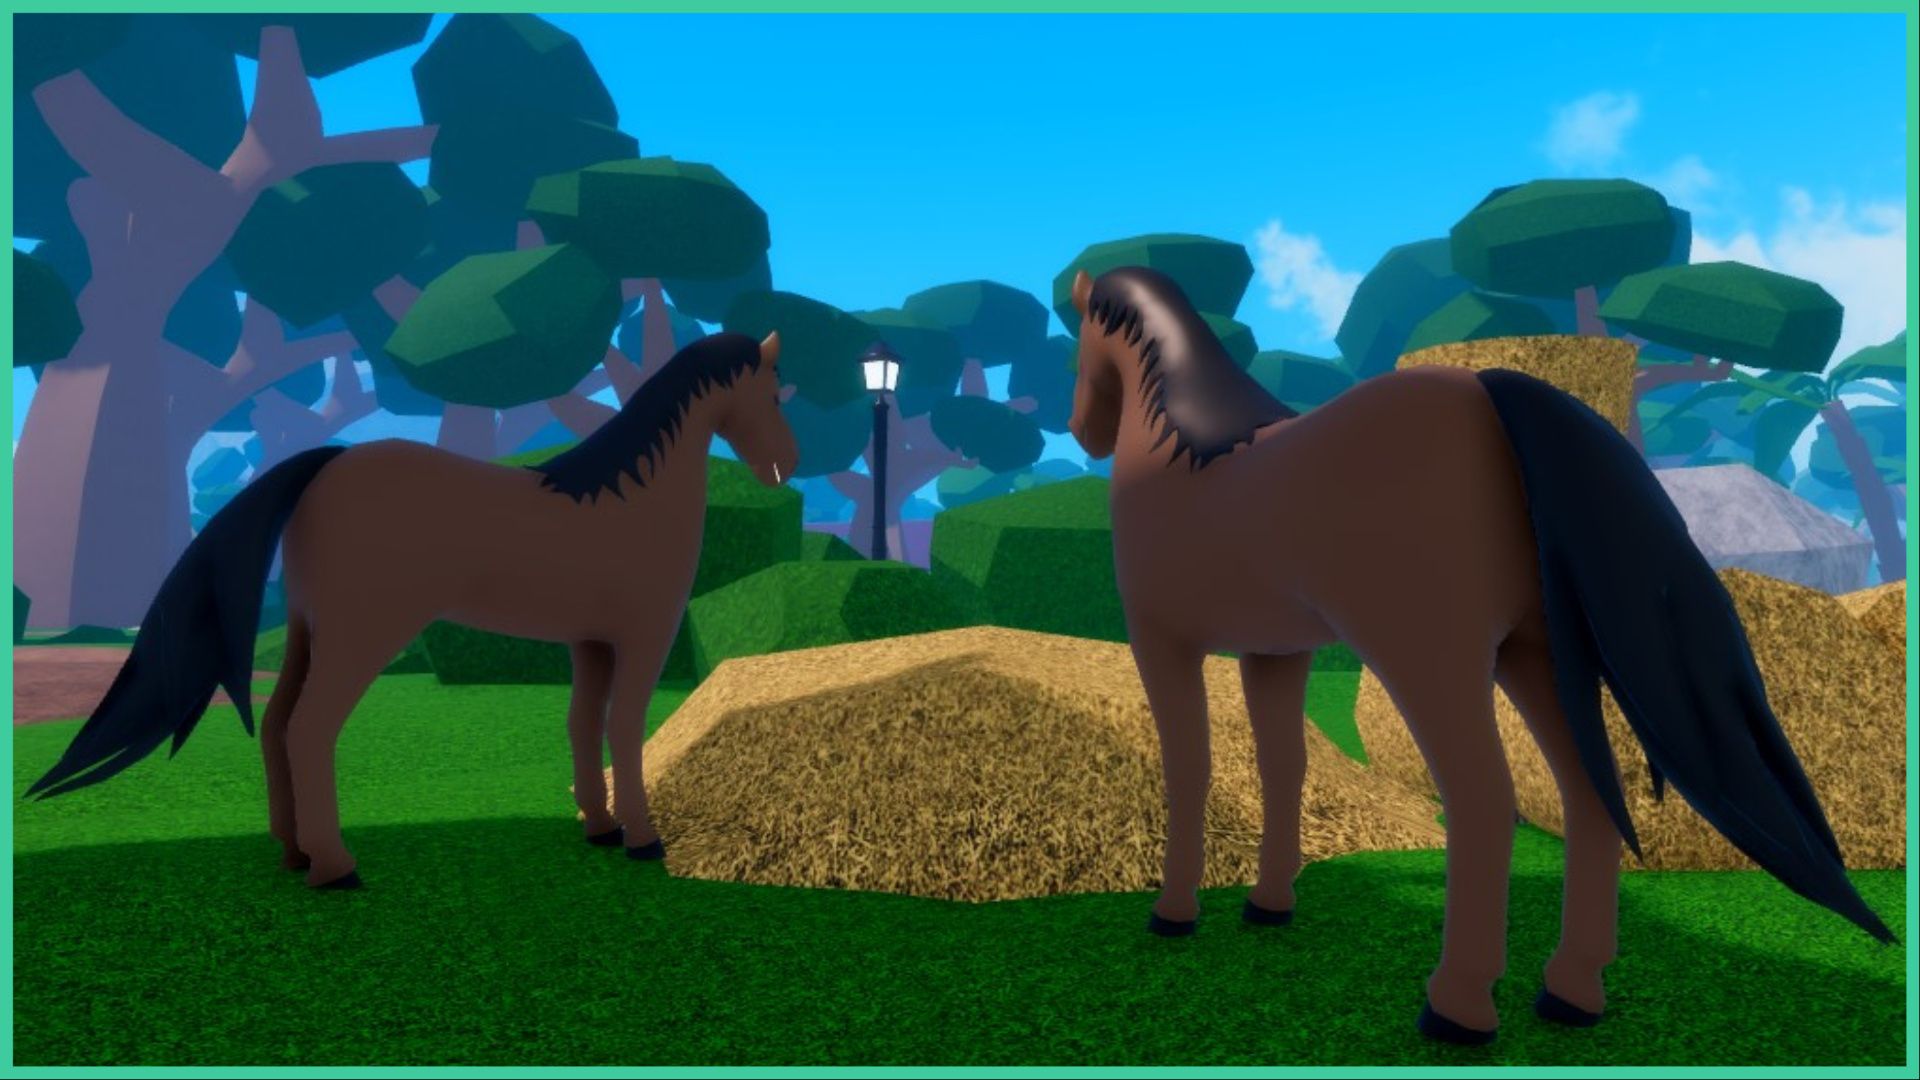 feature image for our legacy piece fighting styles guide, the screenshot is of two horses in the game by some hay on the grass, with trees in the distance and a streetlamp glowing in the middle